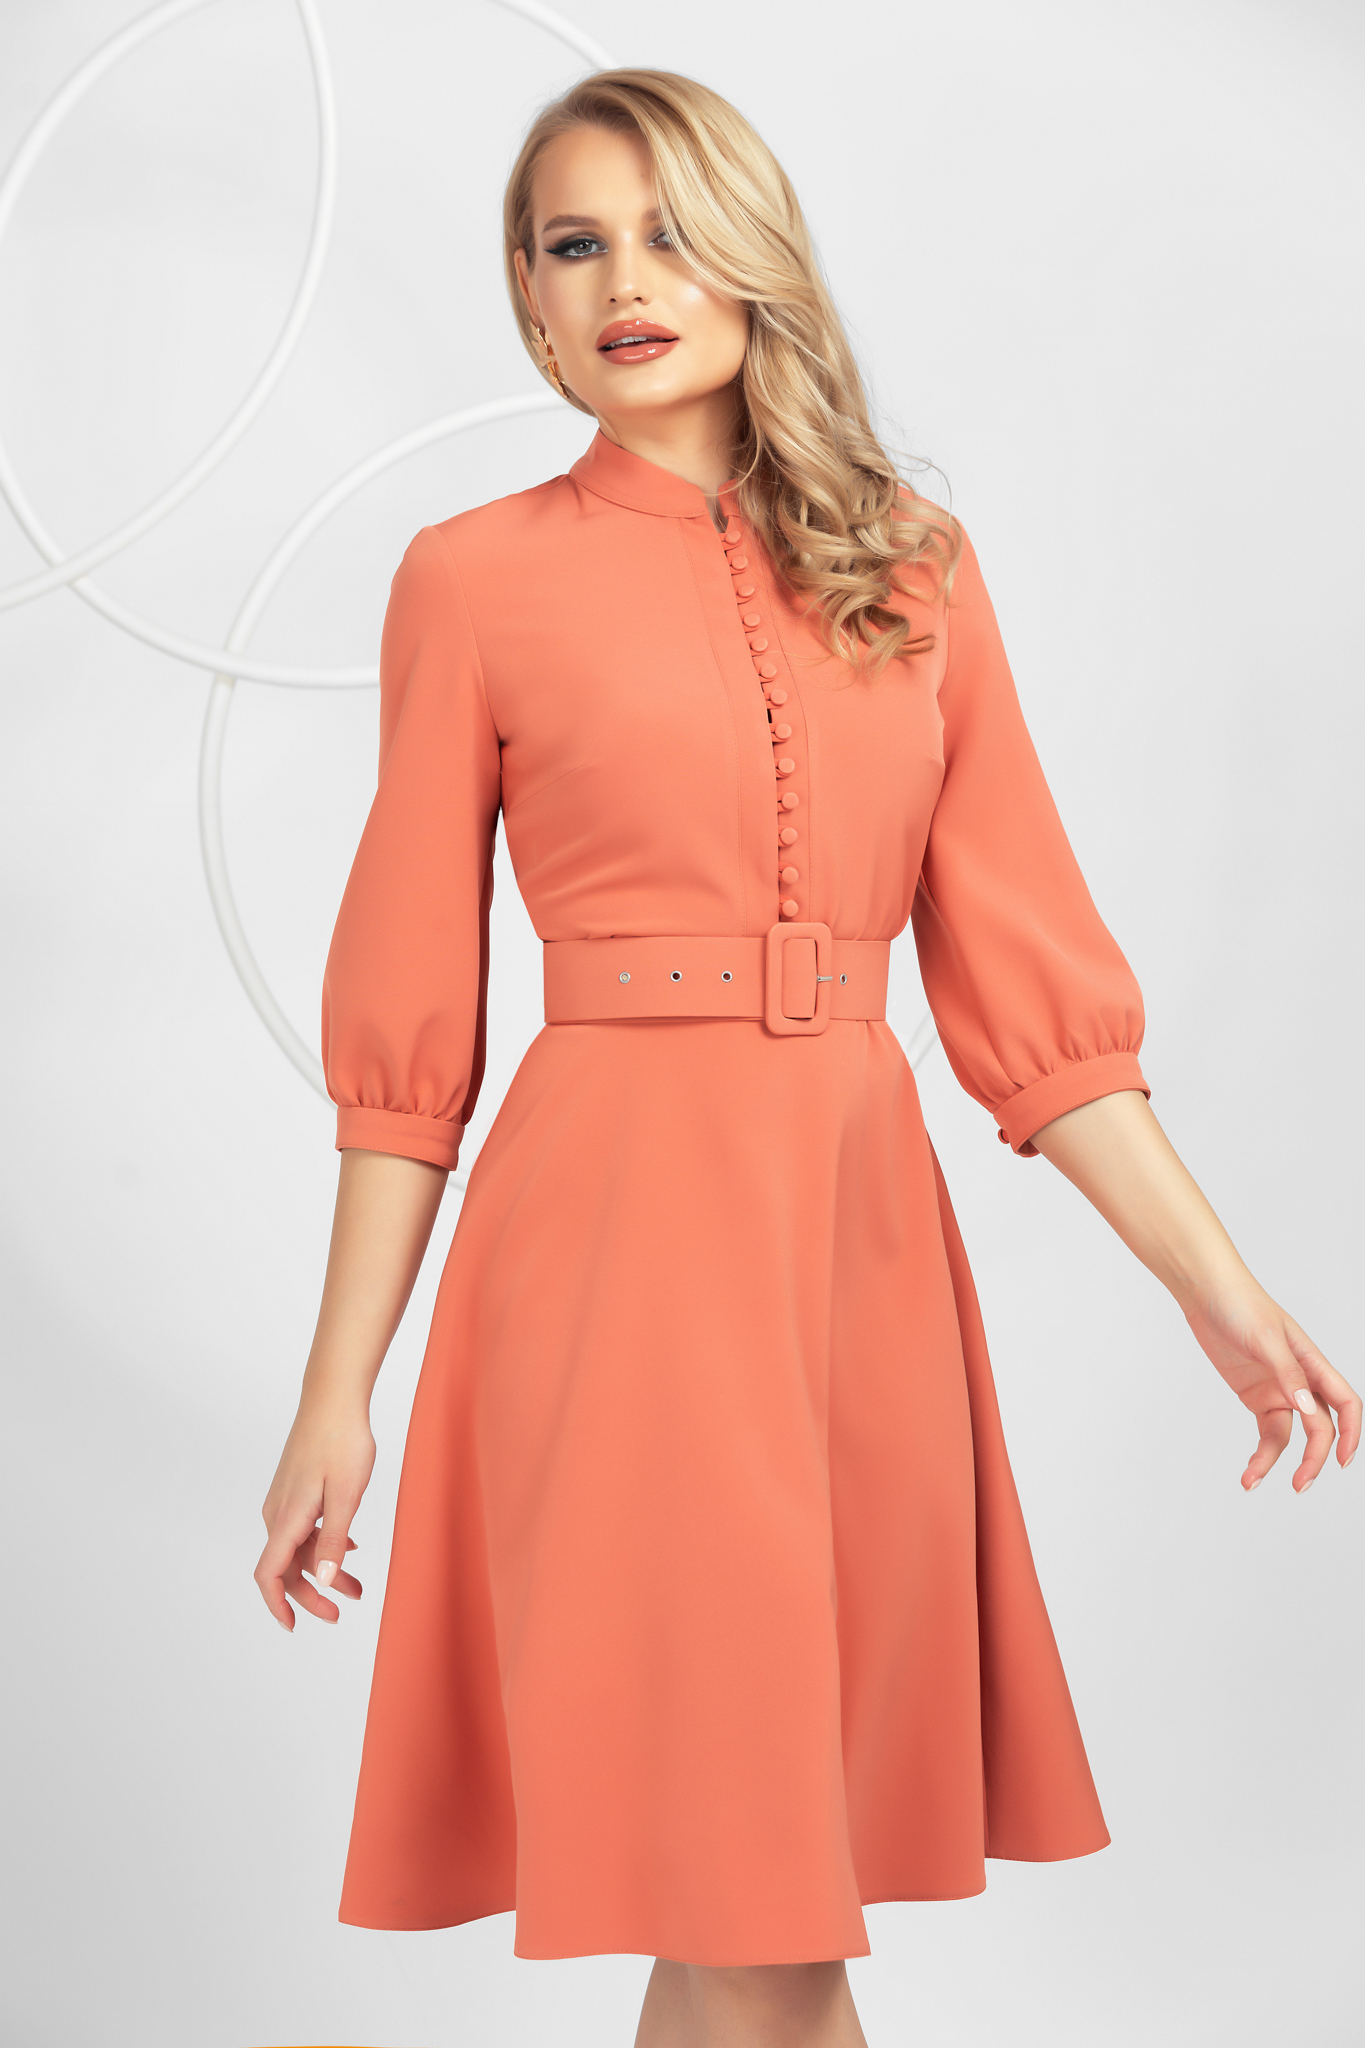 Dress coral office midi cloche slightly elastic fabric with button accessories